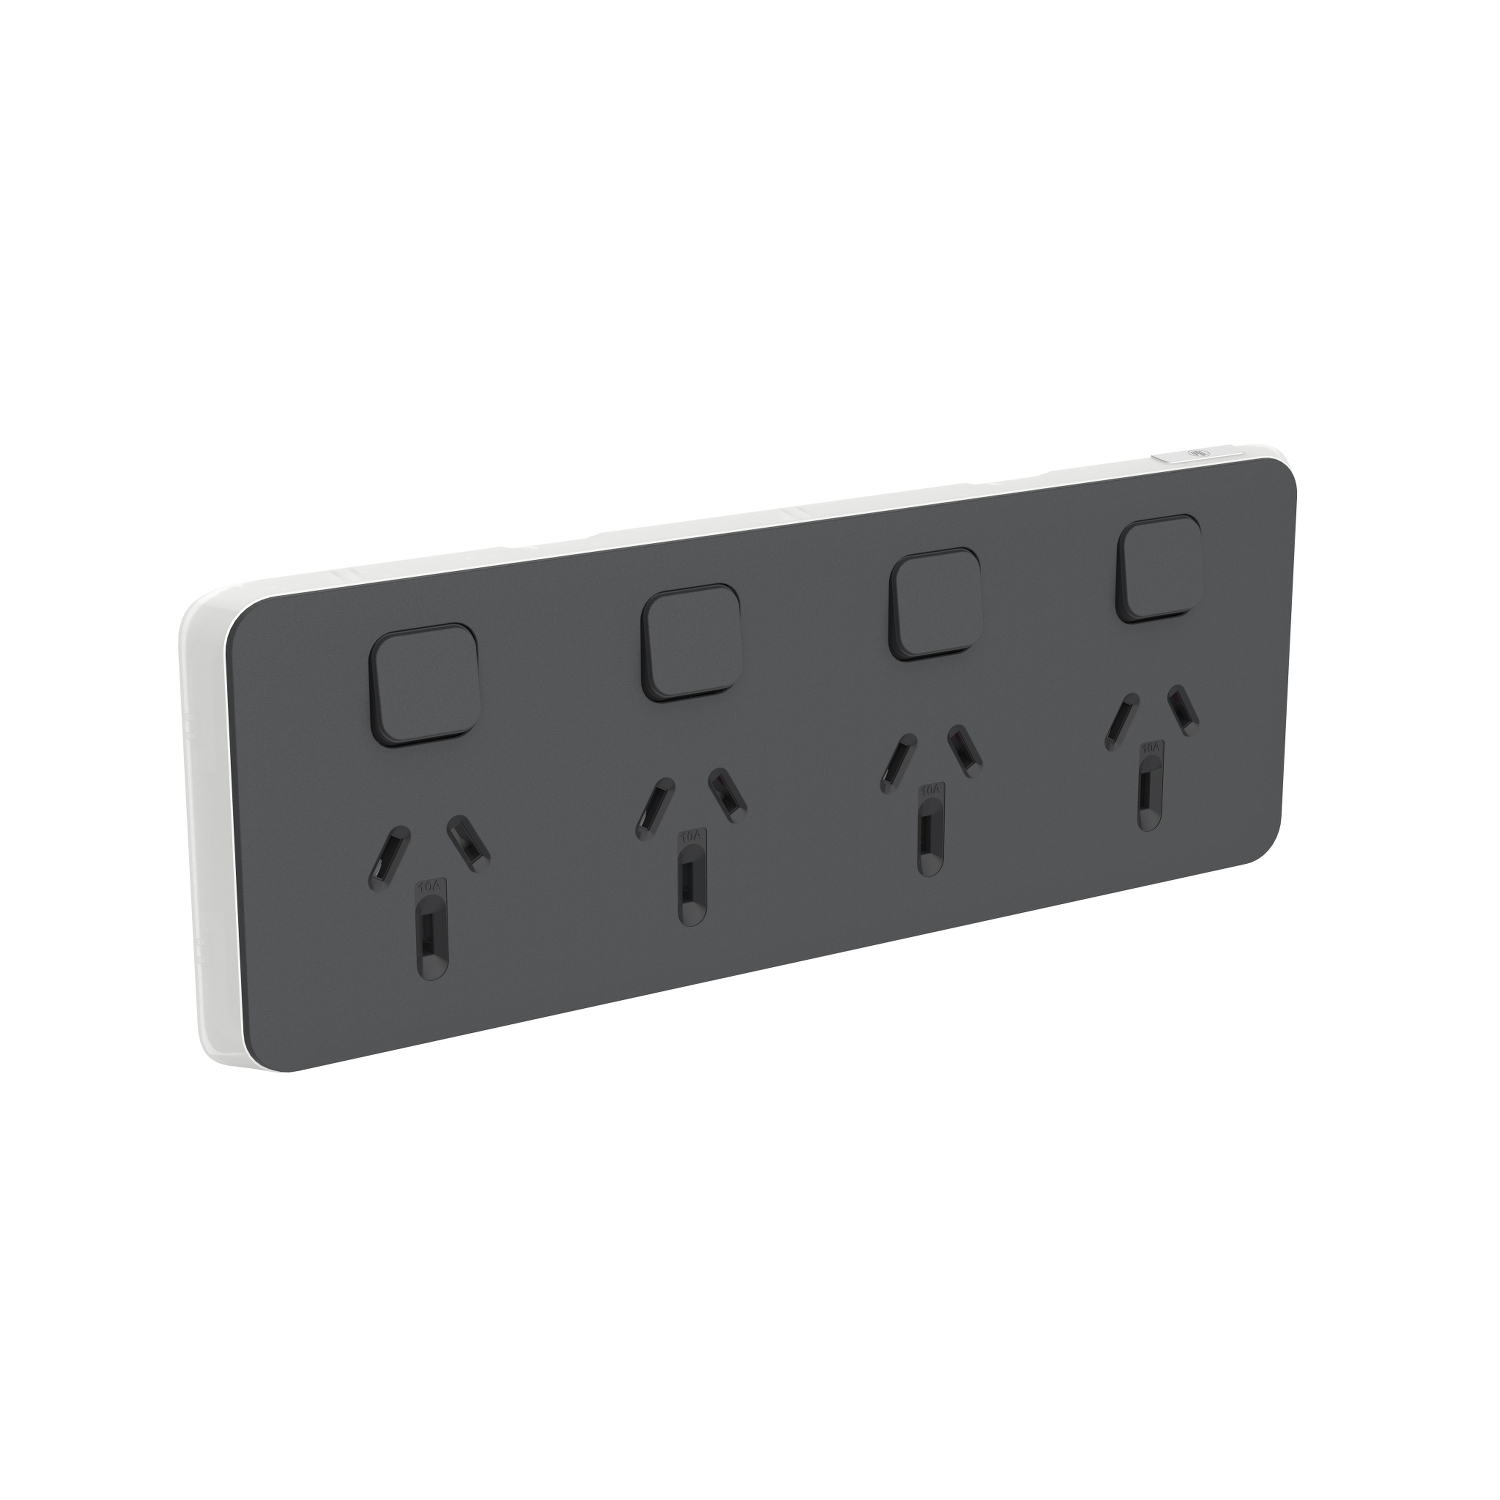 PDL Iconic, cover frame for Quad switched GPO Horizontal 10A 250V - Anthracite